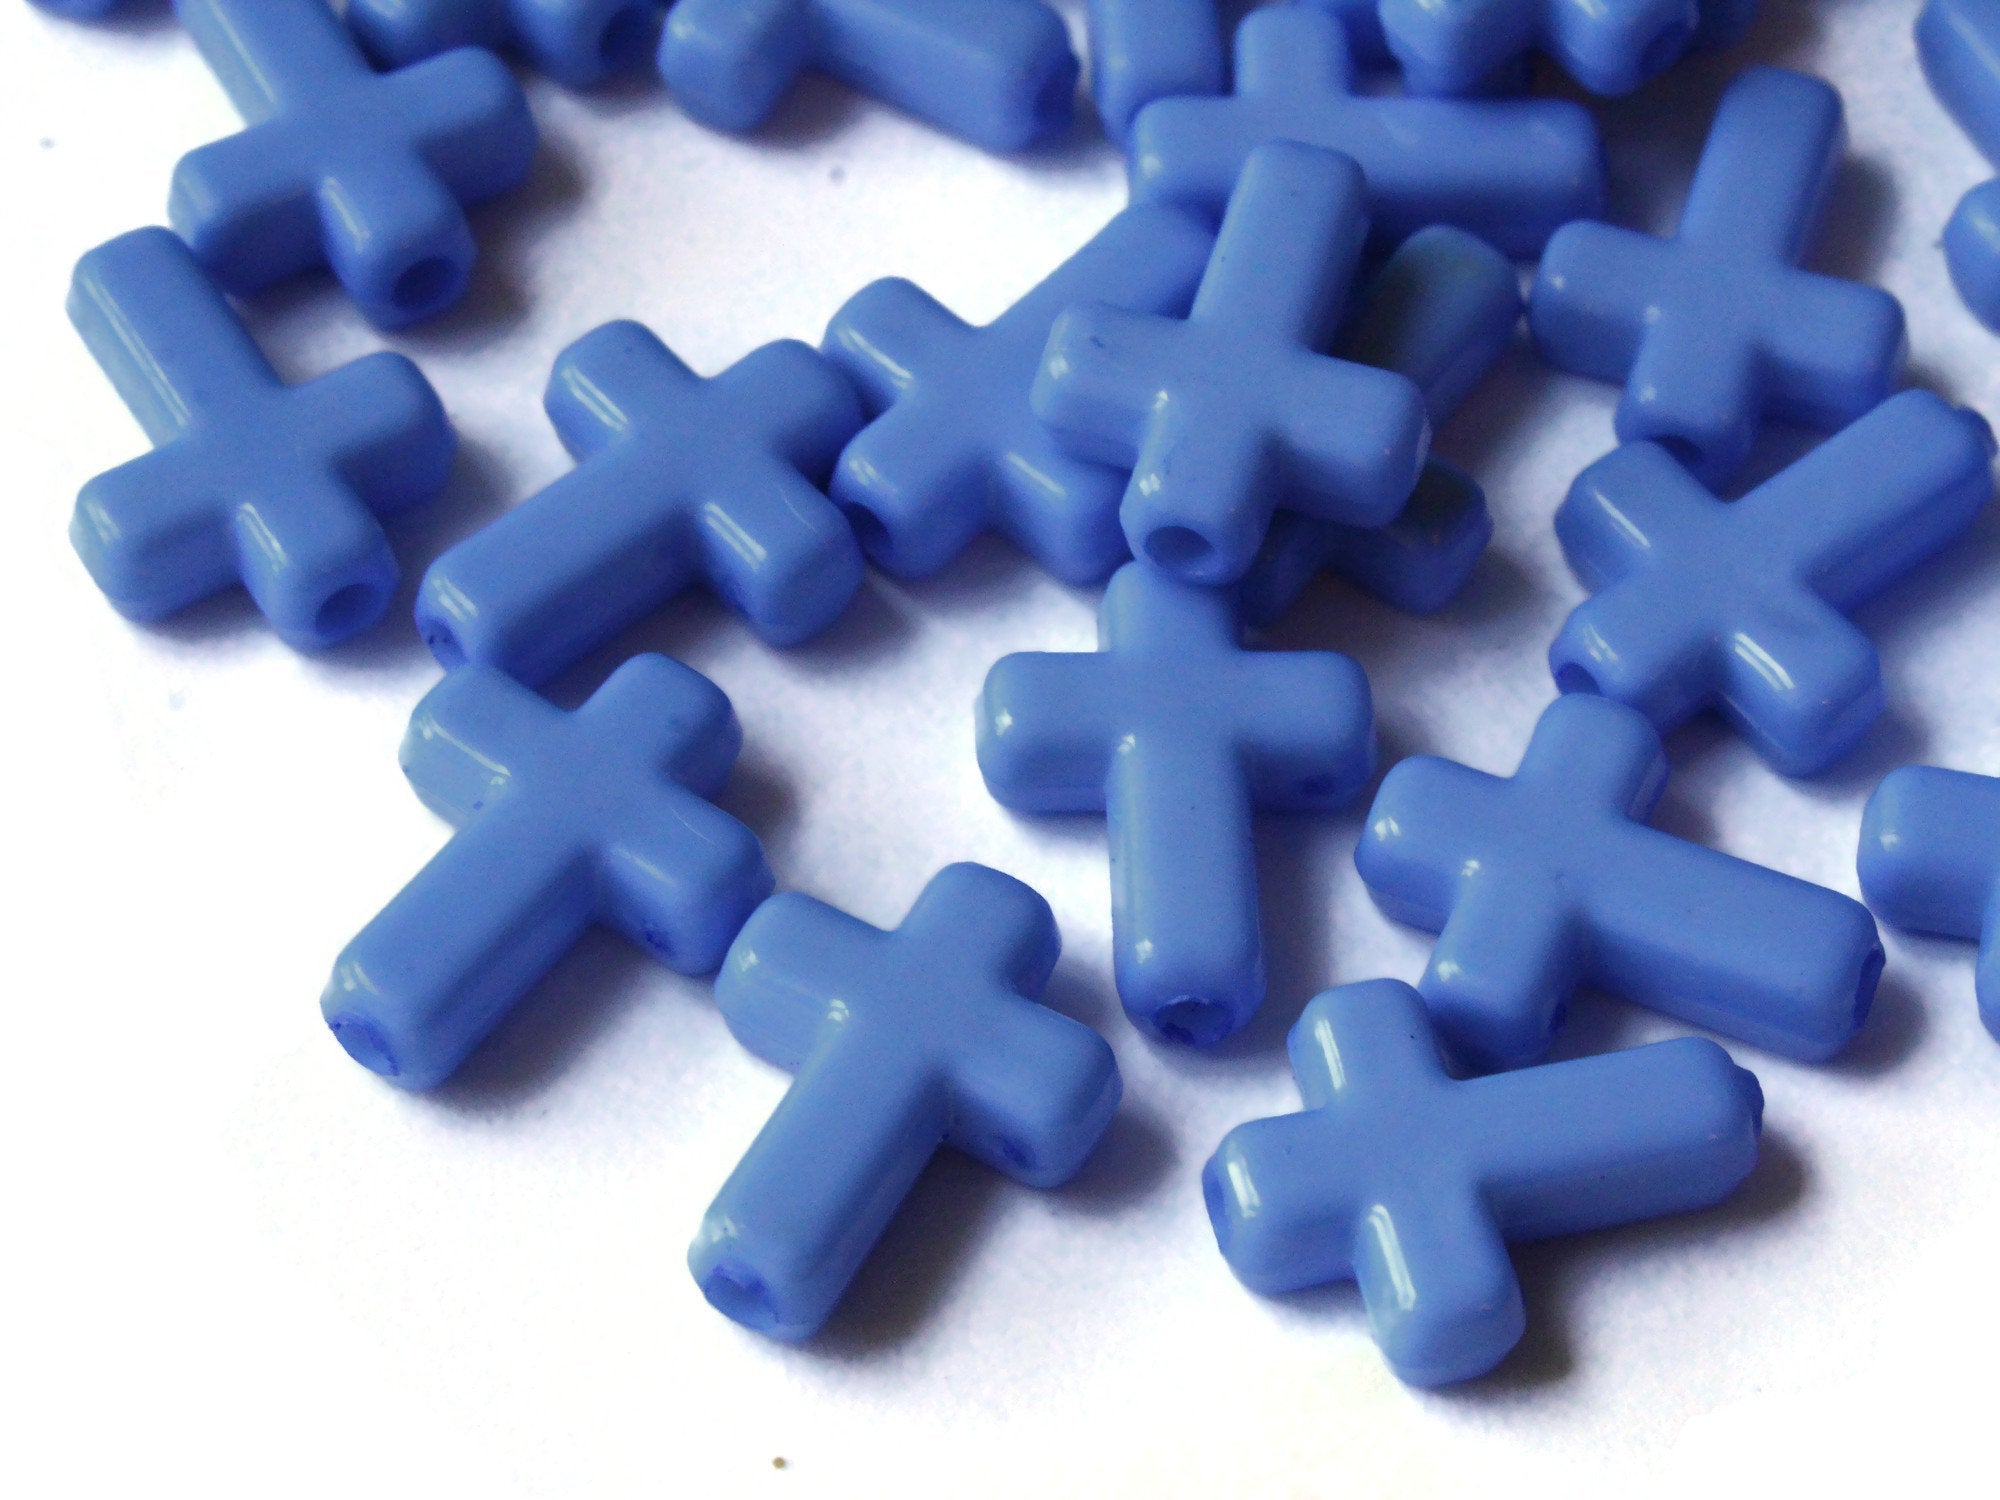 50 16mm Blue Plastic Cross Beads Christian Beads by Smileyboy | Michaels